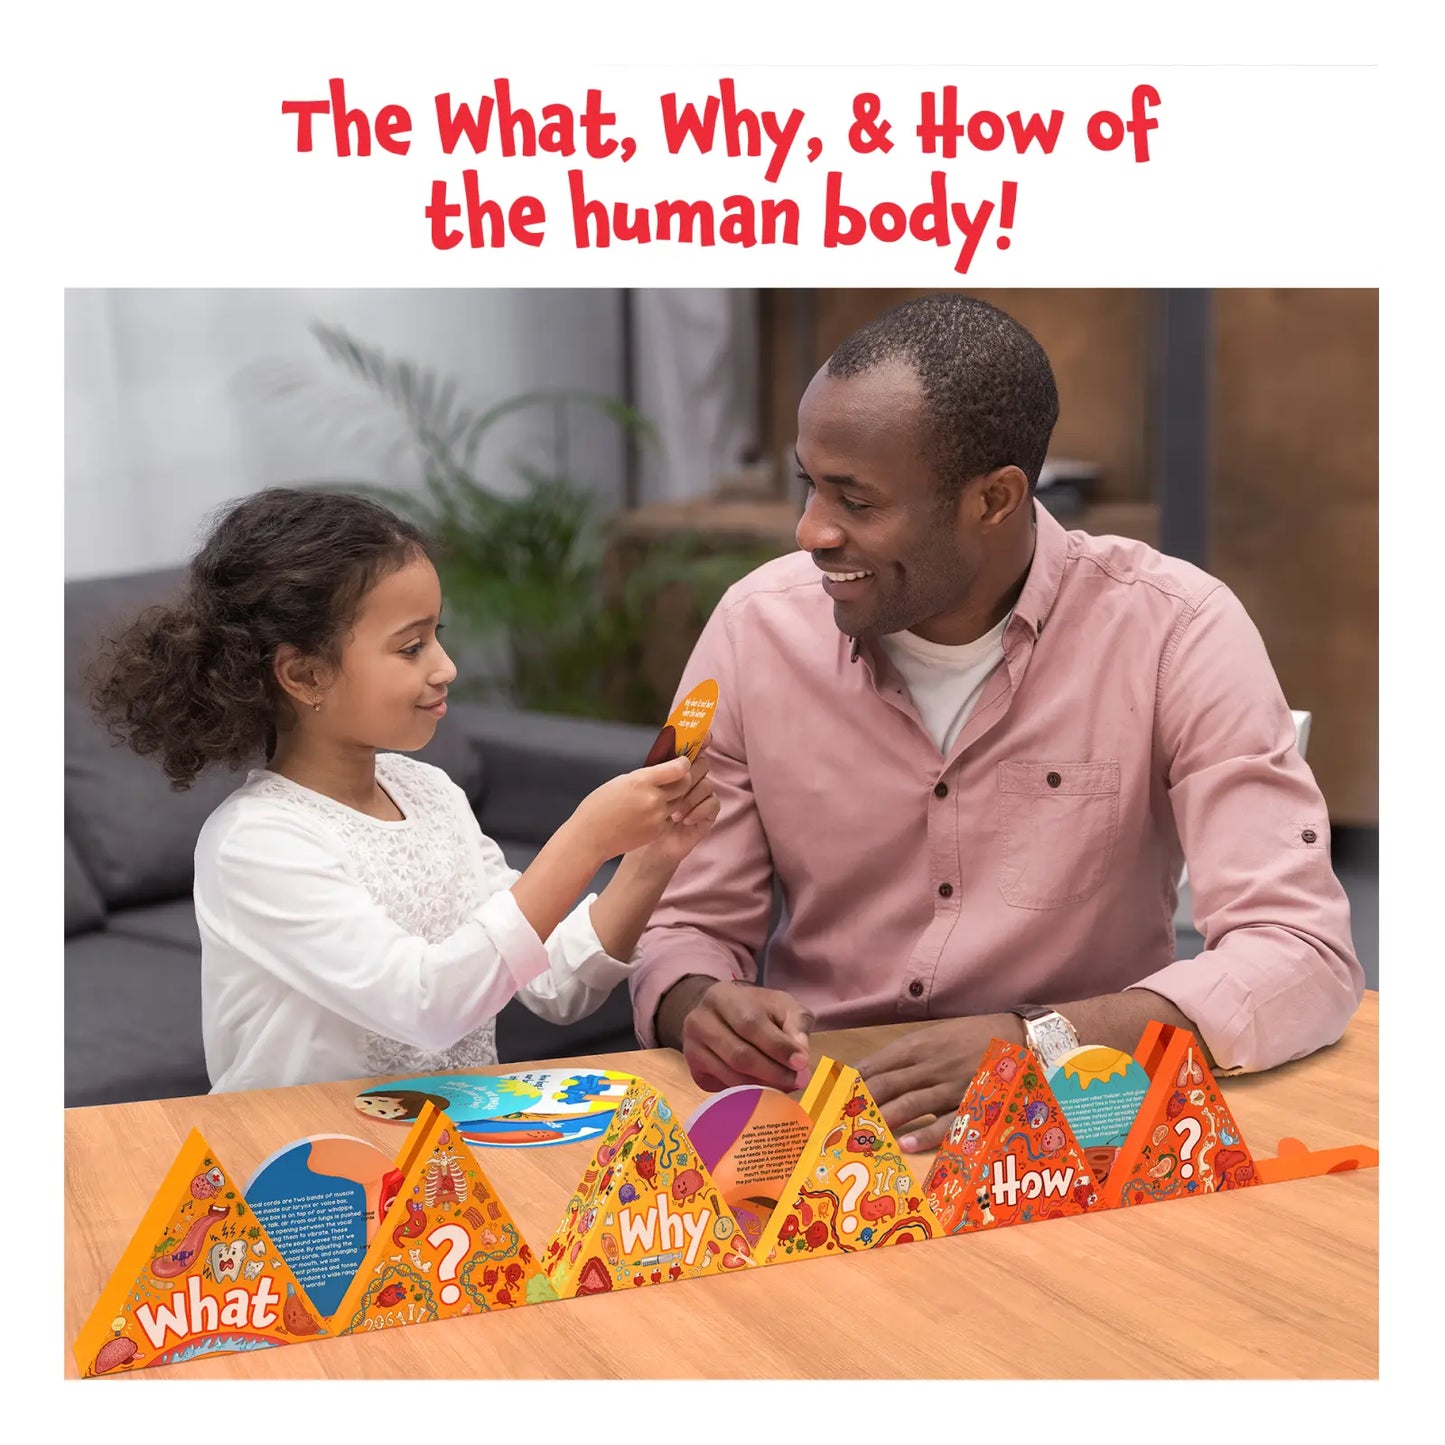 Science Snippets Kit - The Human Body (Ages 7+)